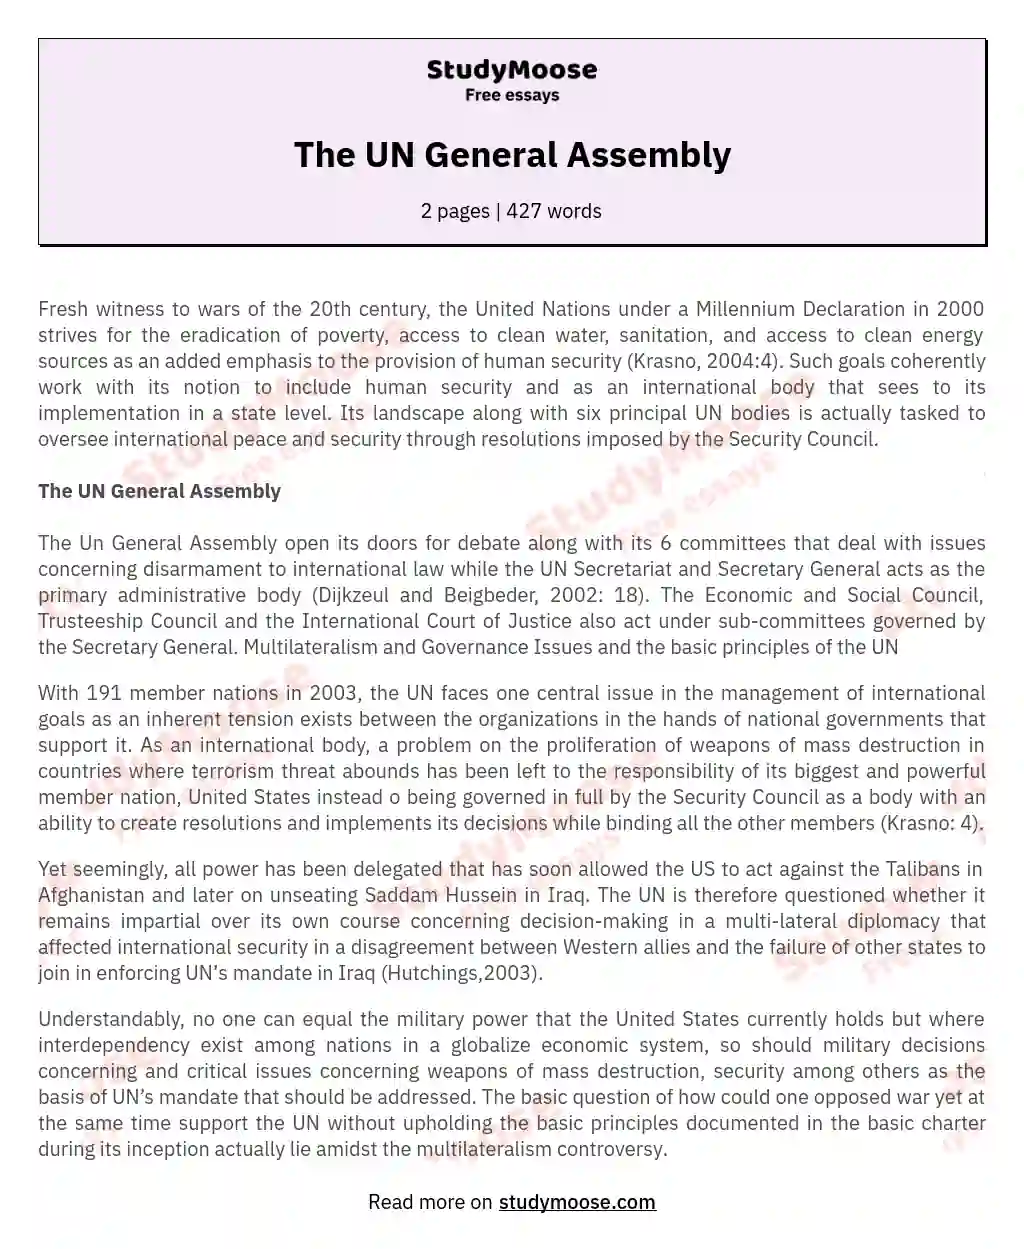 The UN General Assembly essay